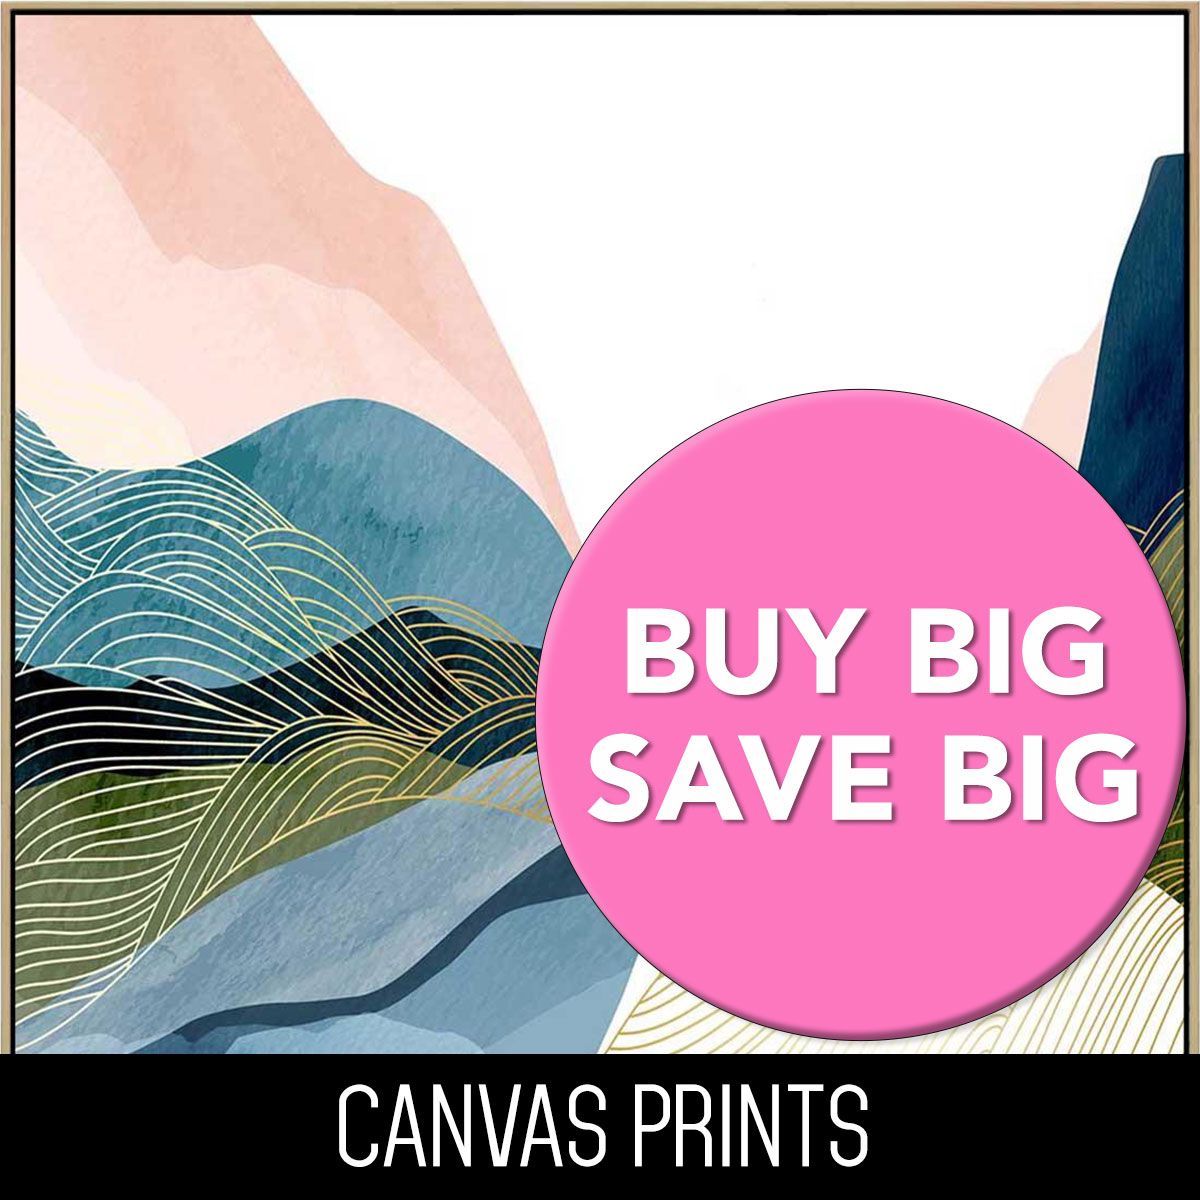 View All Canvas Prints